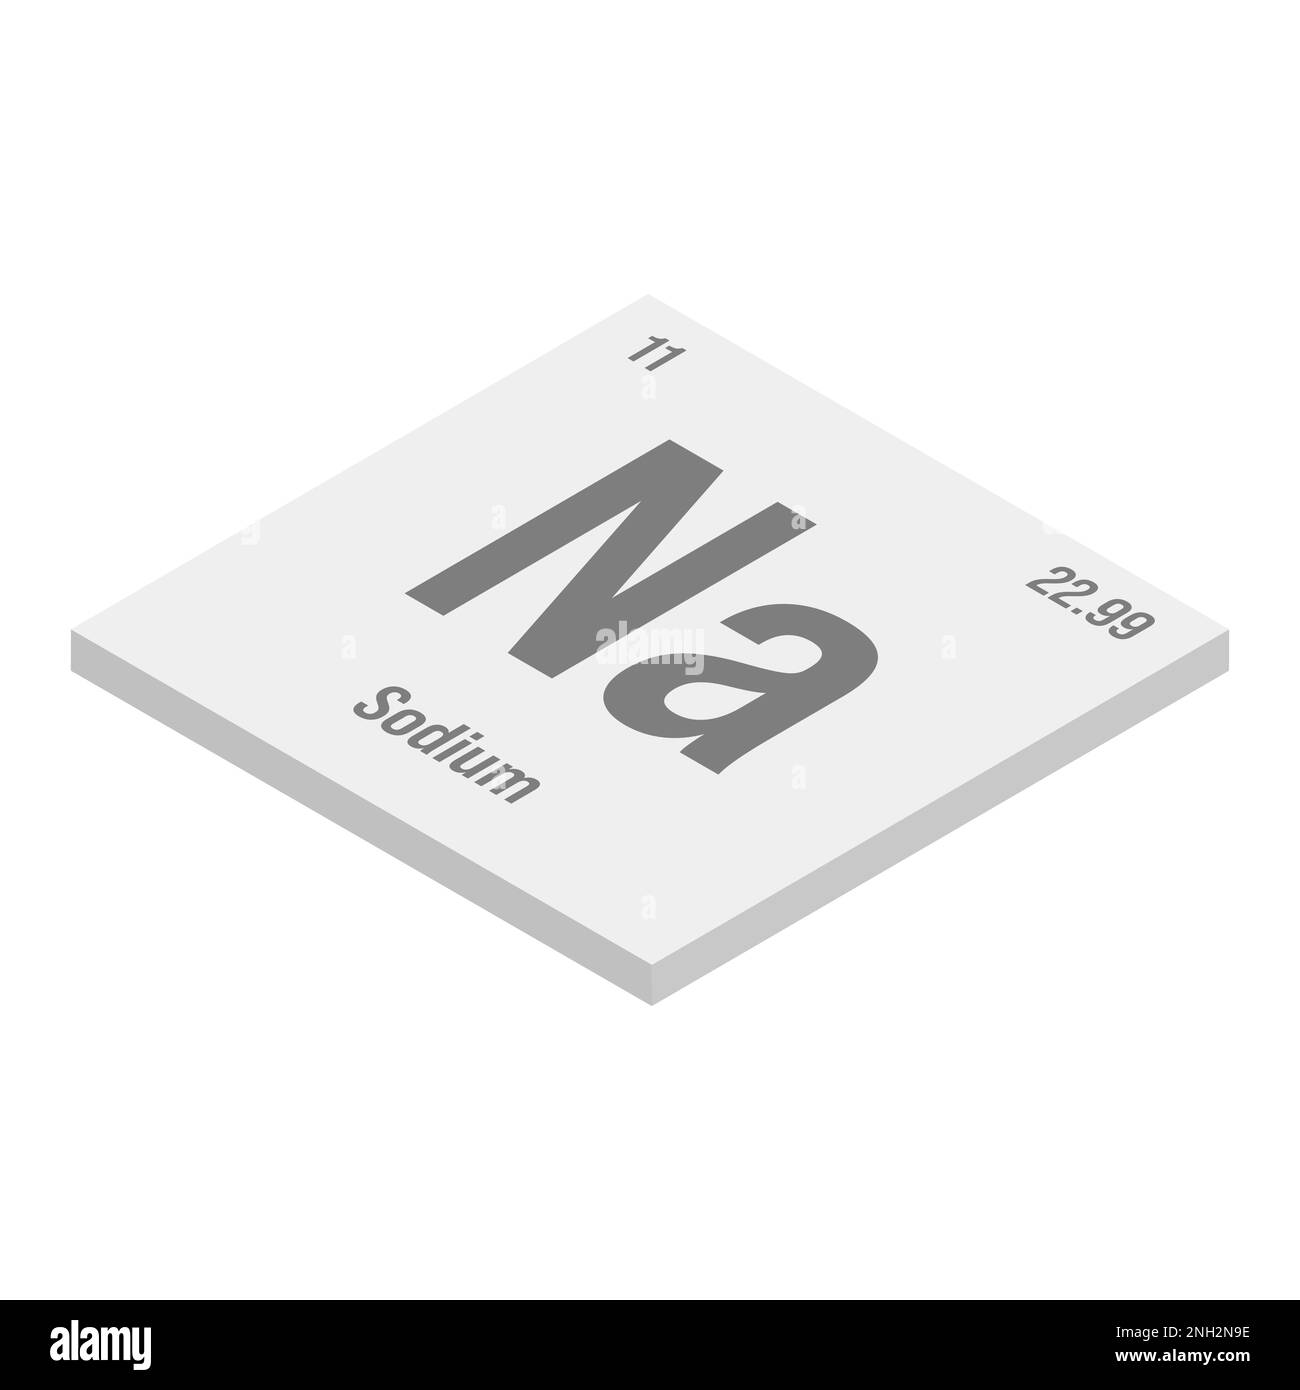 Sodium, Na, gray 3D isometric illustration of periodic table element with name, symbol, atomic number and weight. Alkali metal with various industrial uses, such as in soap, certain types of glass, and as a medication for certain medical conditions. Stock Vector